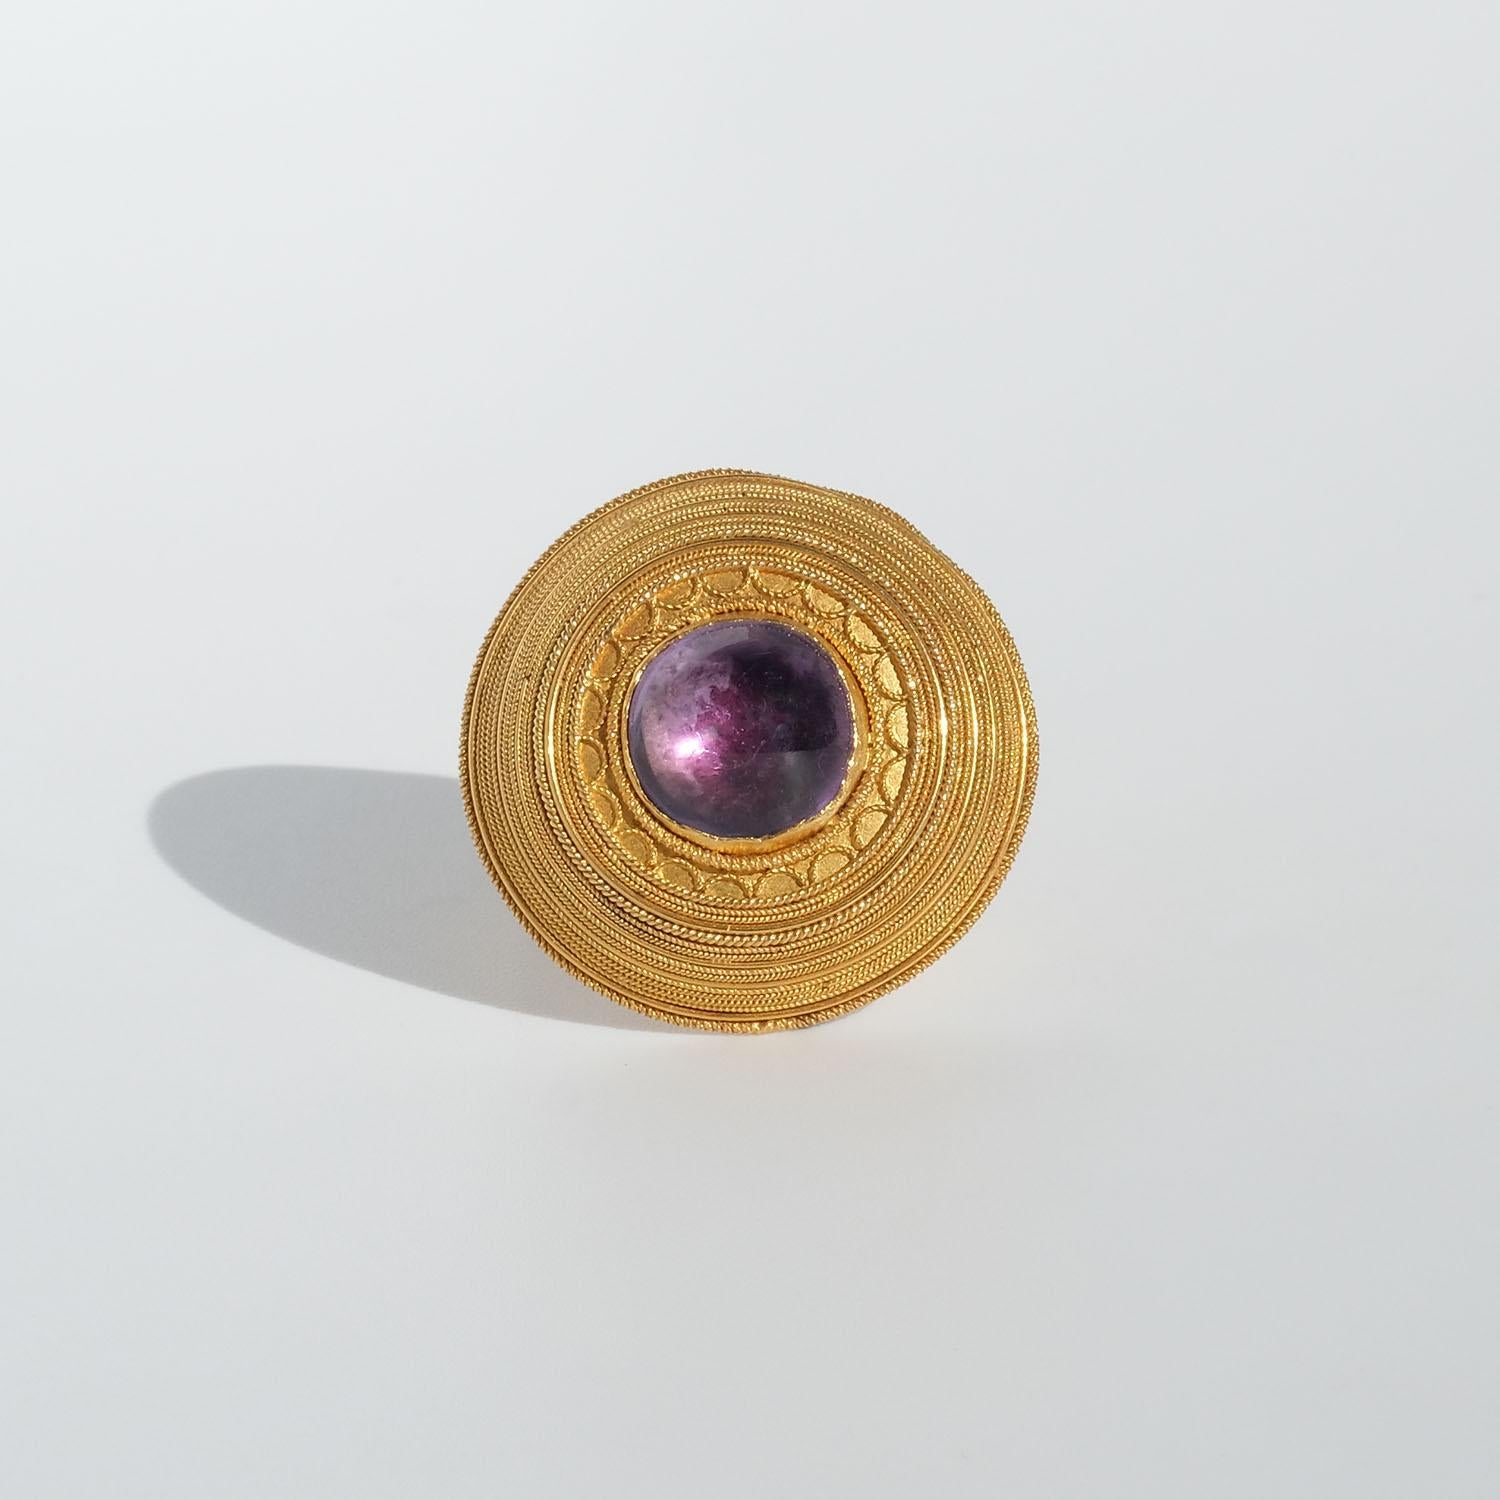 Antique 18k Gold and Amethyst Brooch/Pendant by Gustaf Möllenborg Made Year 1863 For Sale 3